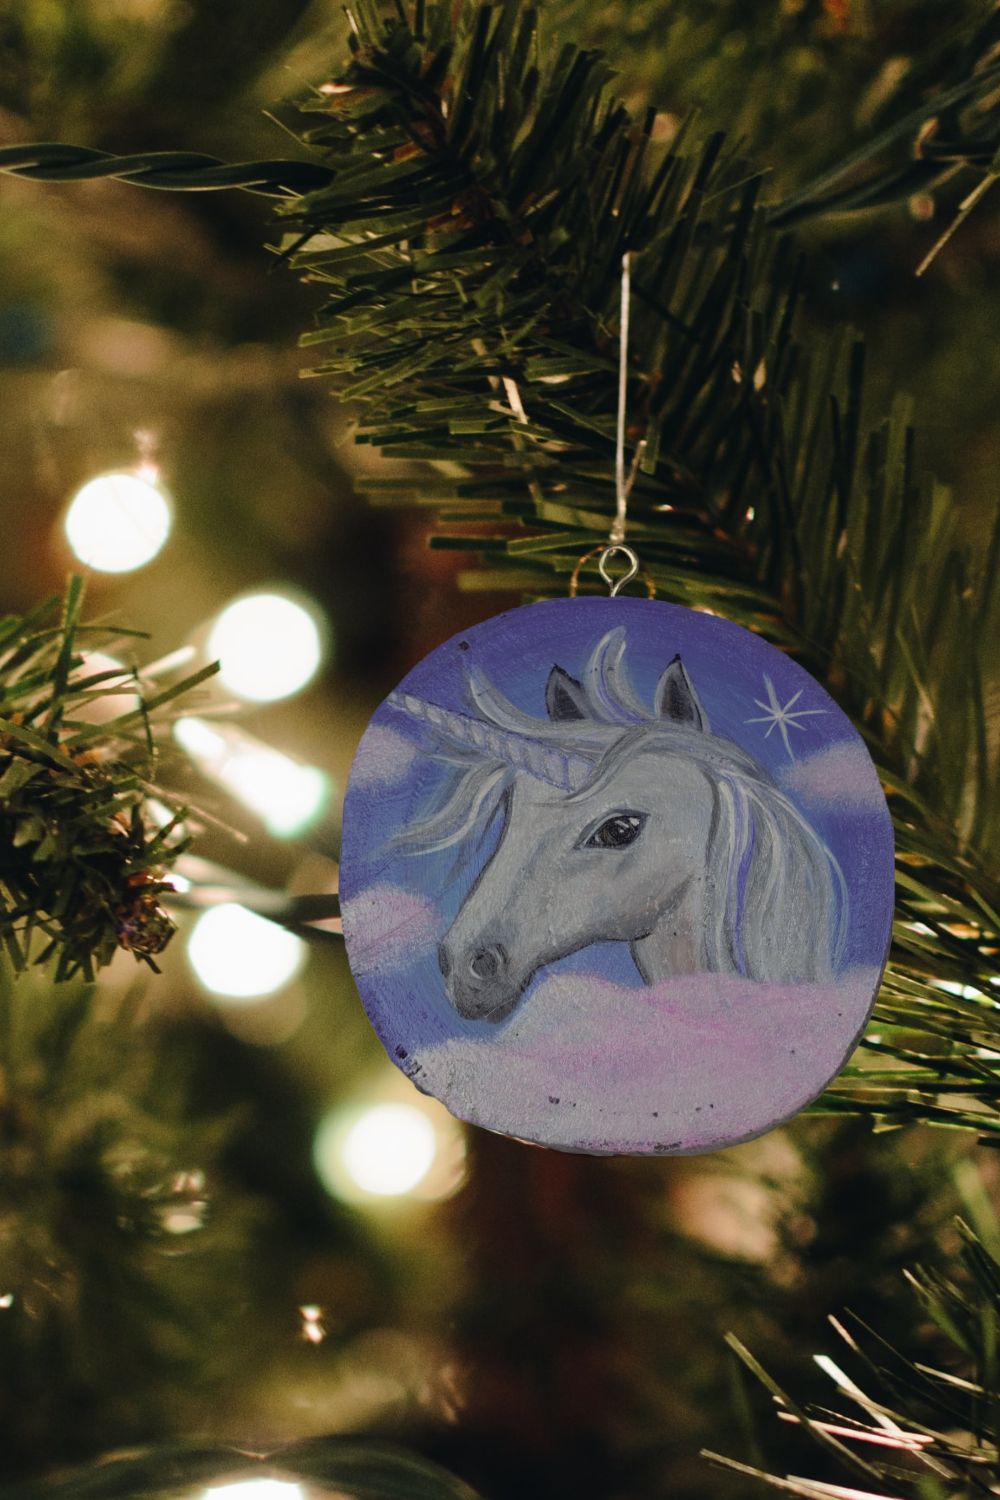 handpainted unicorn wood round ornament with lights and Christmas tree branch